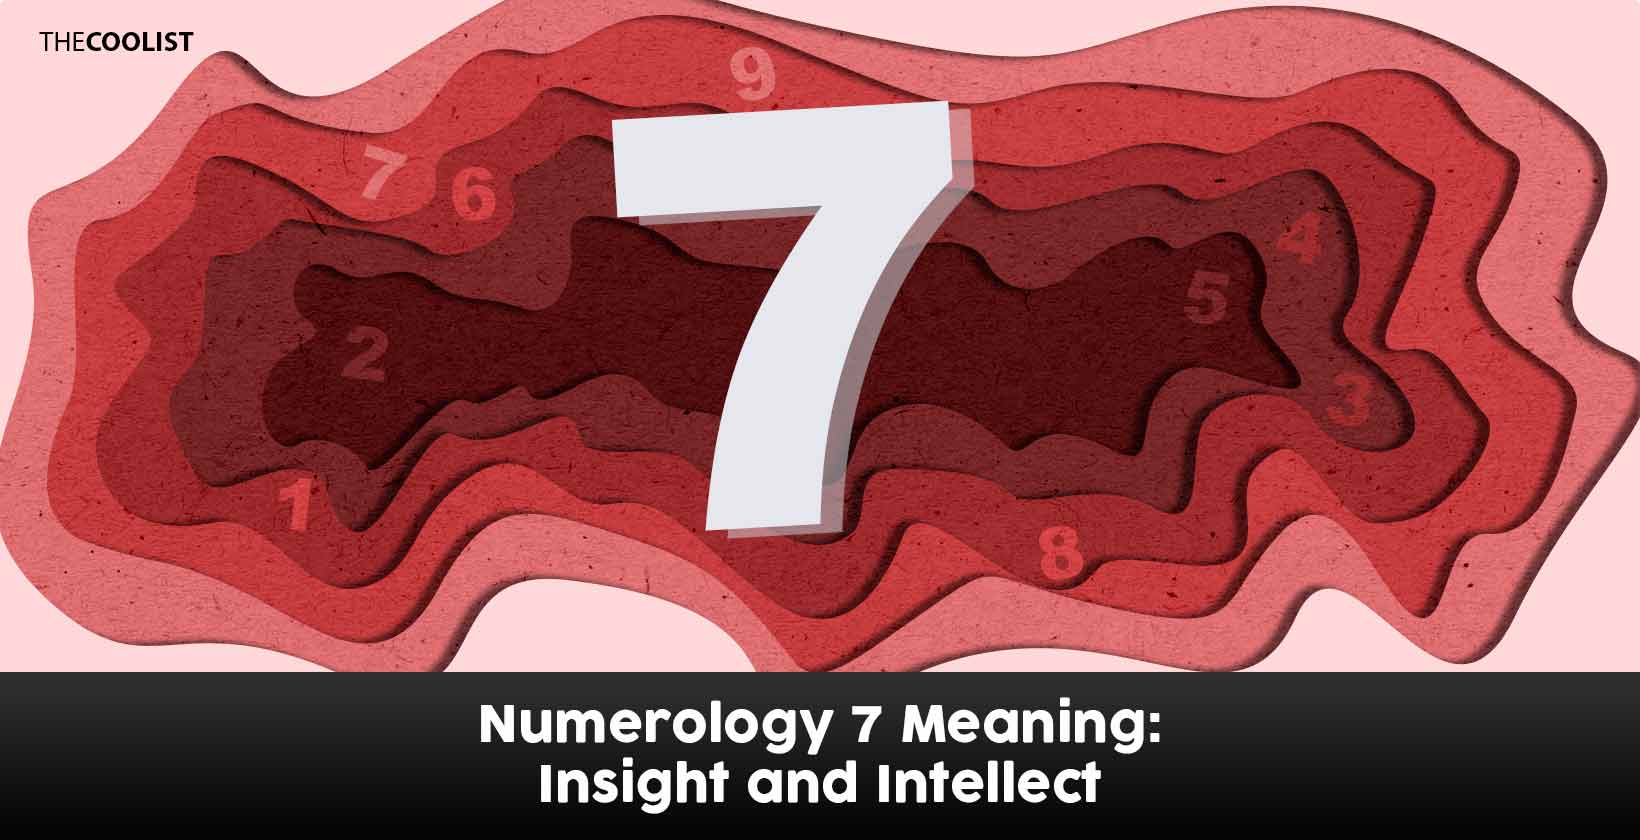 Numerology 7 Meaning